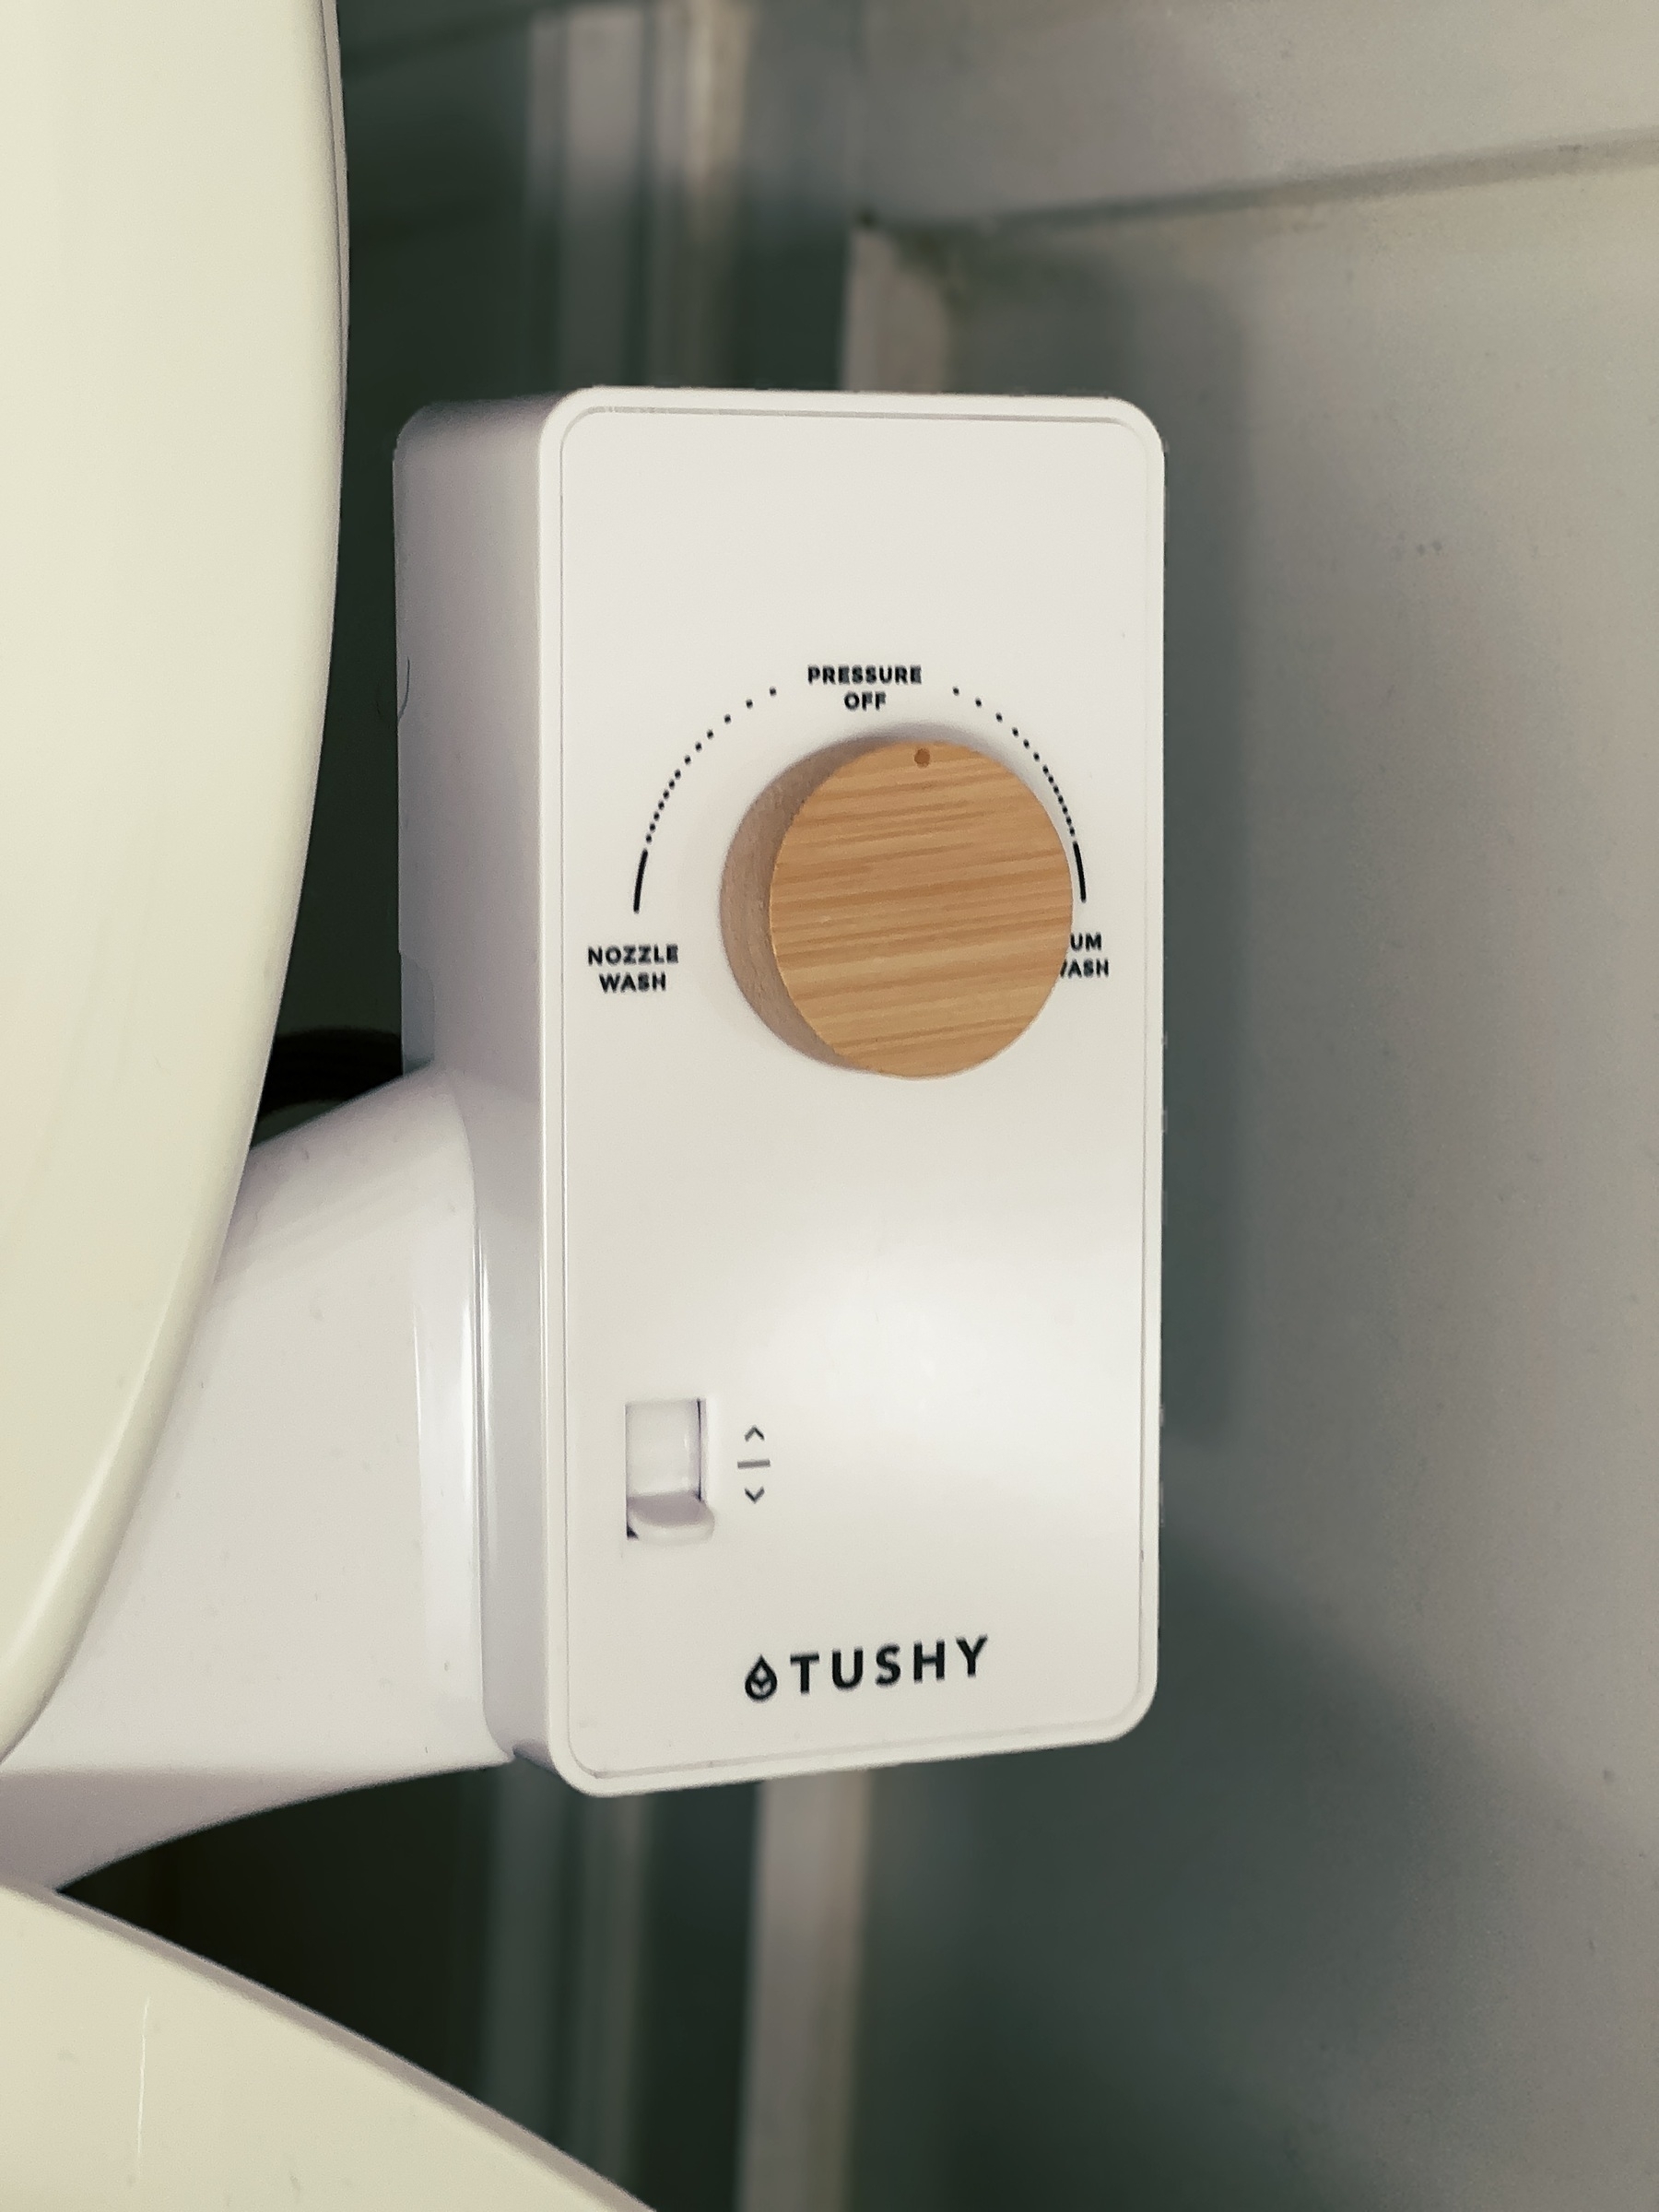 a white wand-only bidet attached to a toilet with the branding Tushy visible, along with a wooden turn-dial control